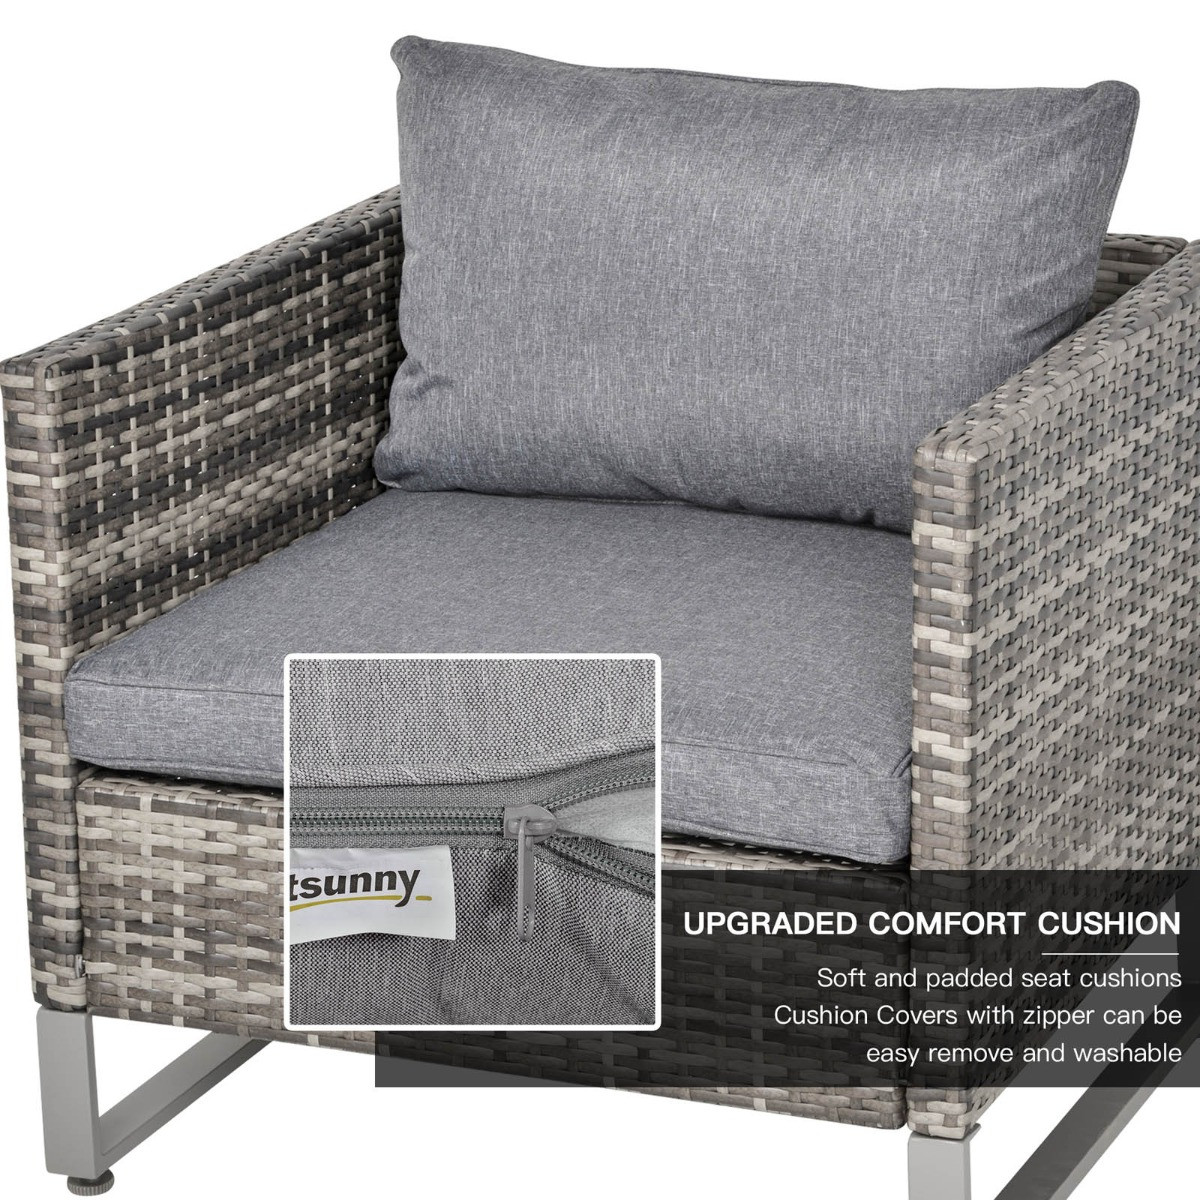 Outsunny  Wicker Rattan Dining Lounge Set, Grey - 4 Seater>